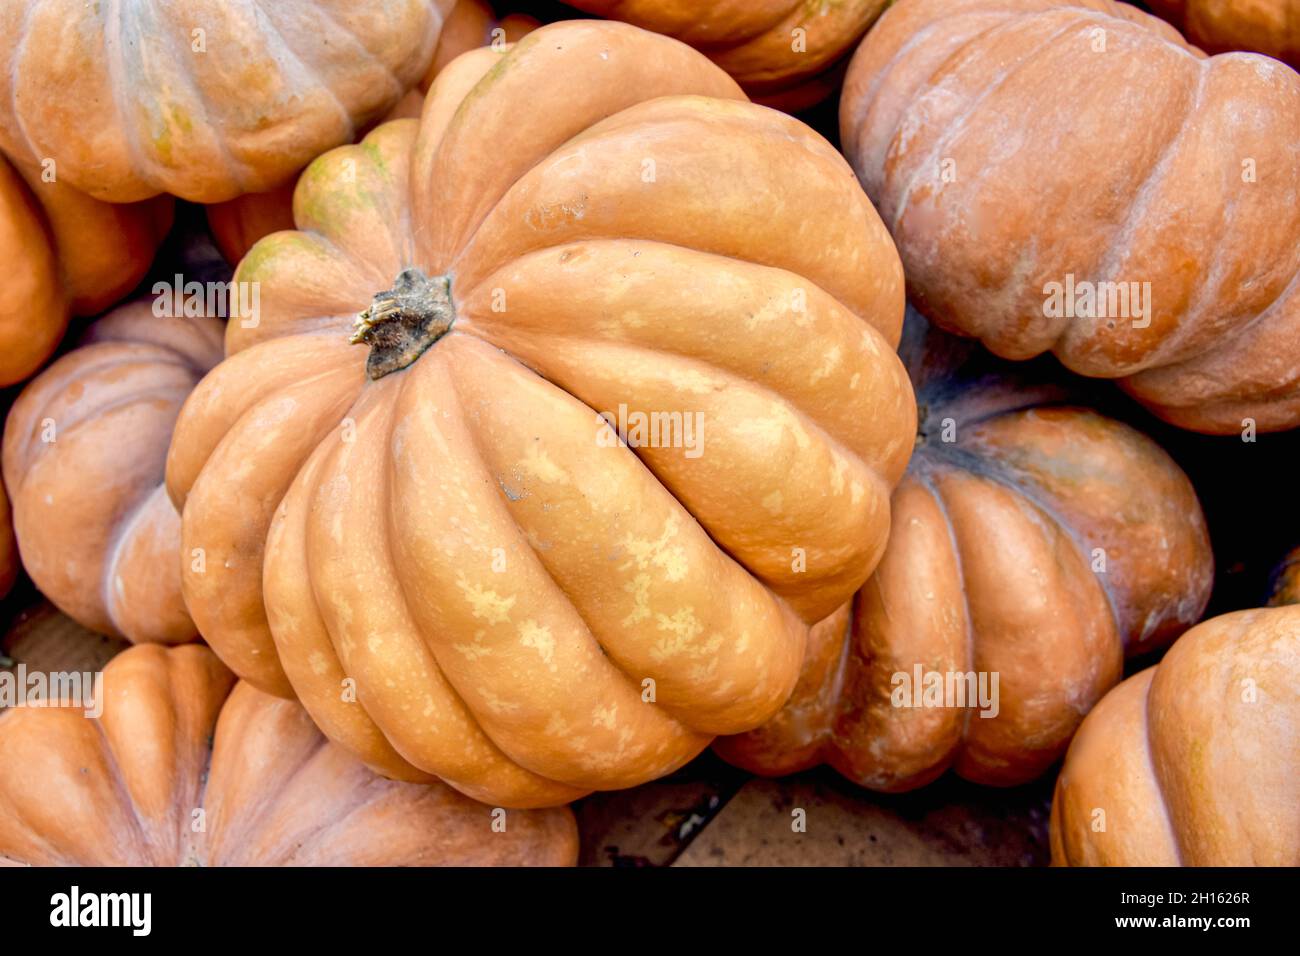 The Long Island cheese pumpkin is an old heirloom variety and its sweet, smooth flesh is known to make superior pumpkin pie. Stock Photo